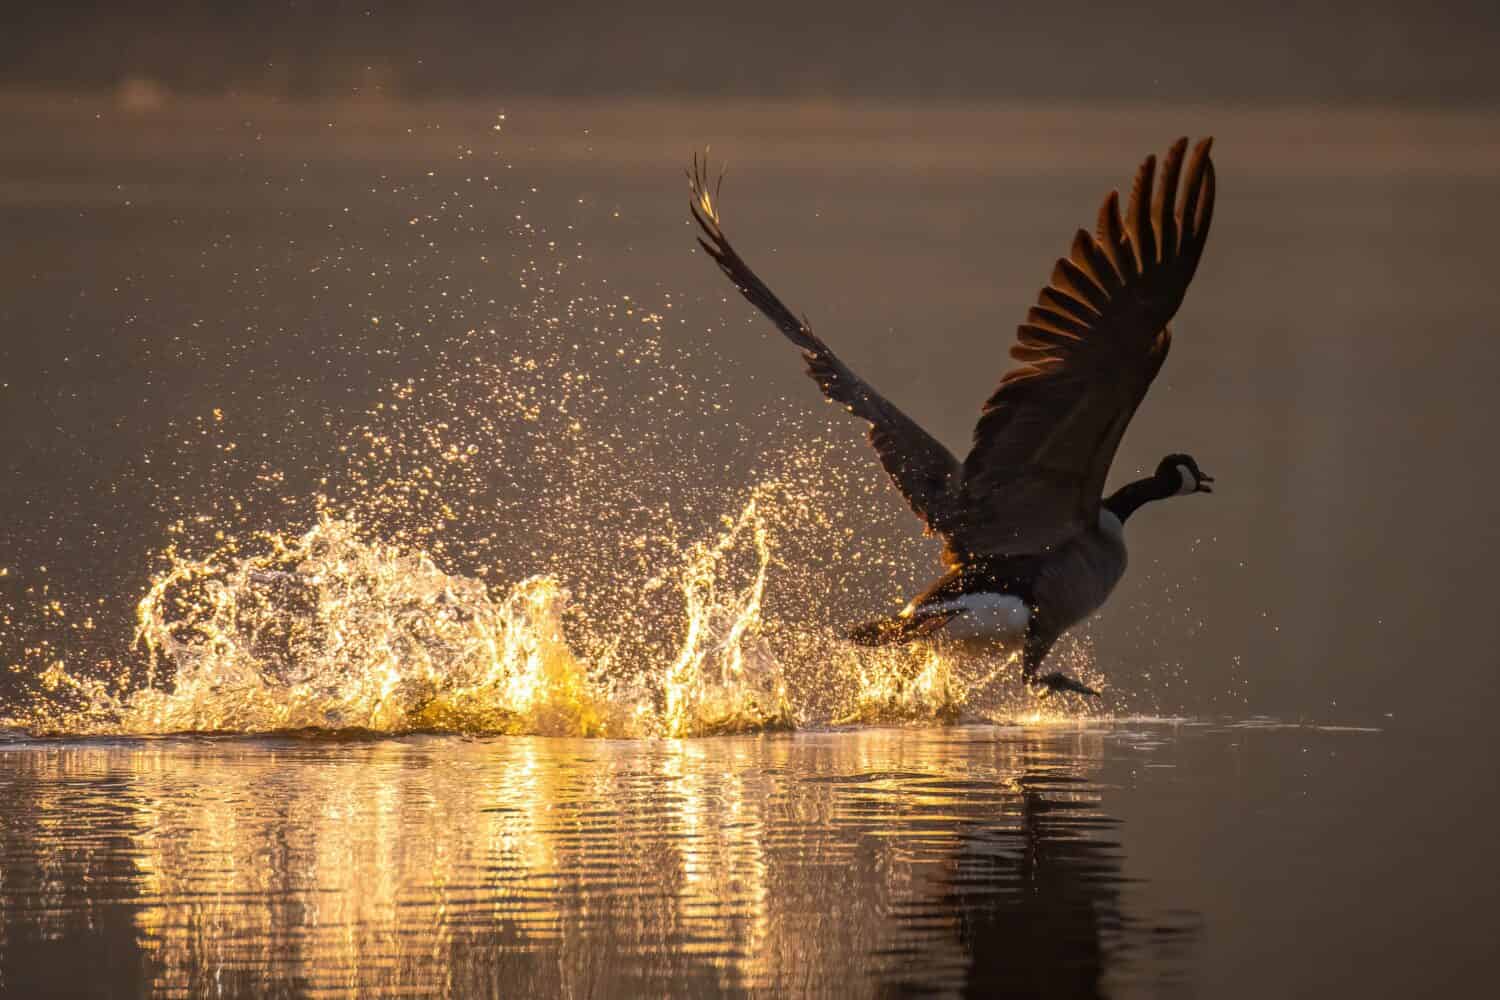 A Canada Goose takes flight with wings spread from the lake in the early morning light. Lake Benson Park, Garner, North Carolina.